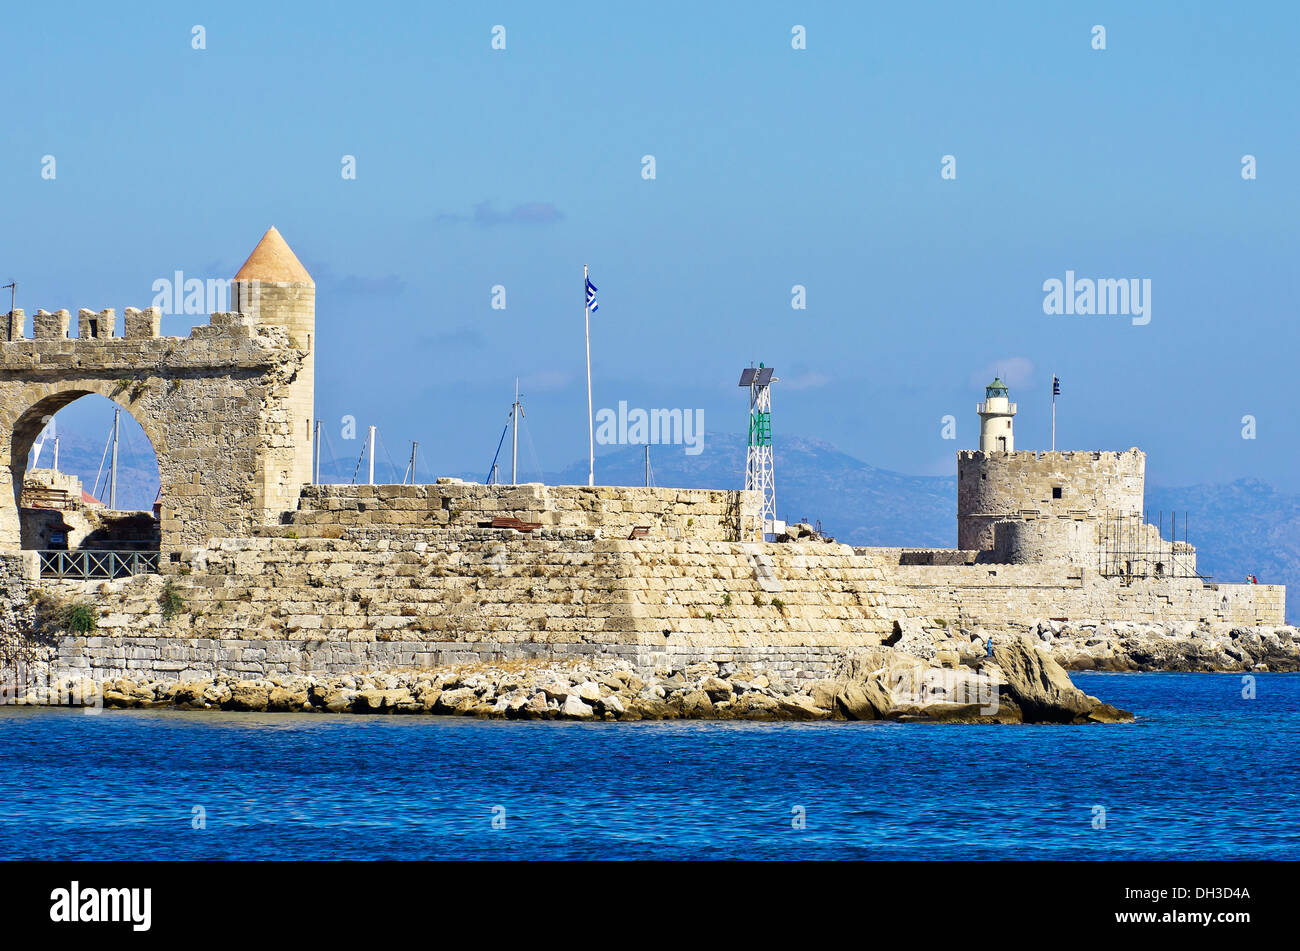 Harbour entrance of Rhodes in front of ramparts or defensive walls, Rhodes, Rhodos Island, Dodecanese, Greece Stock Photo